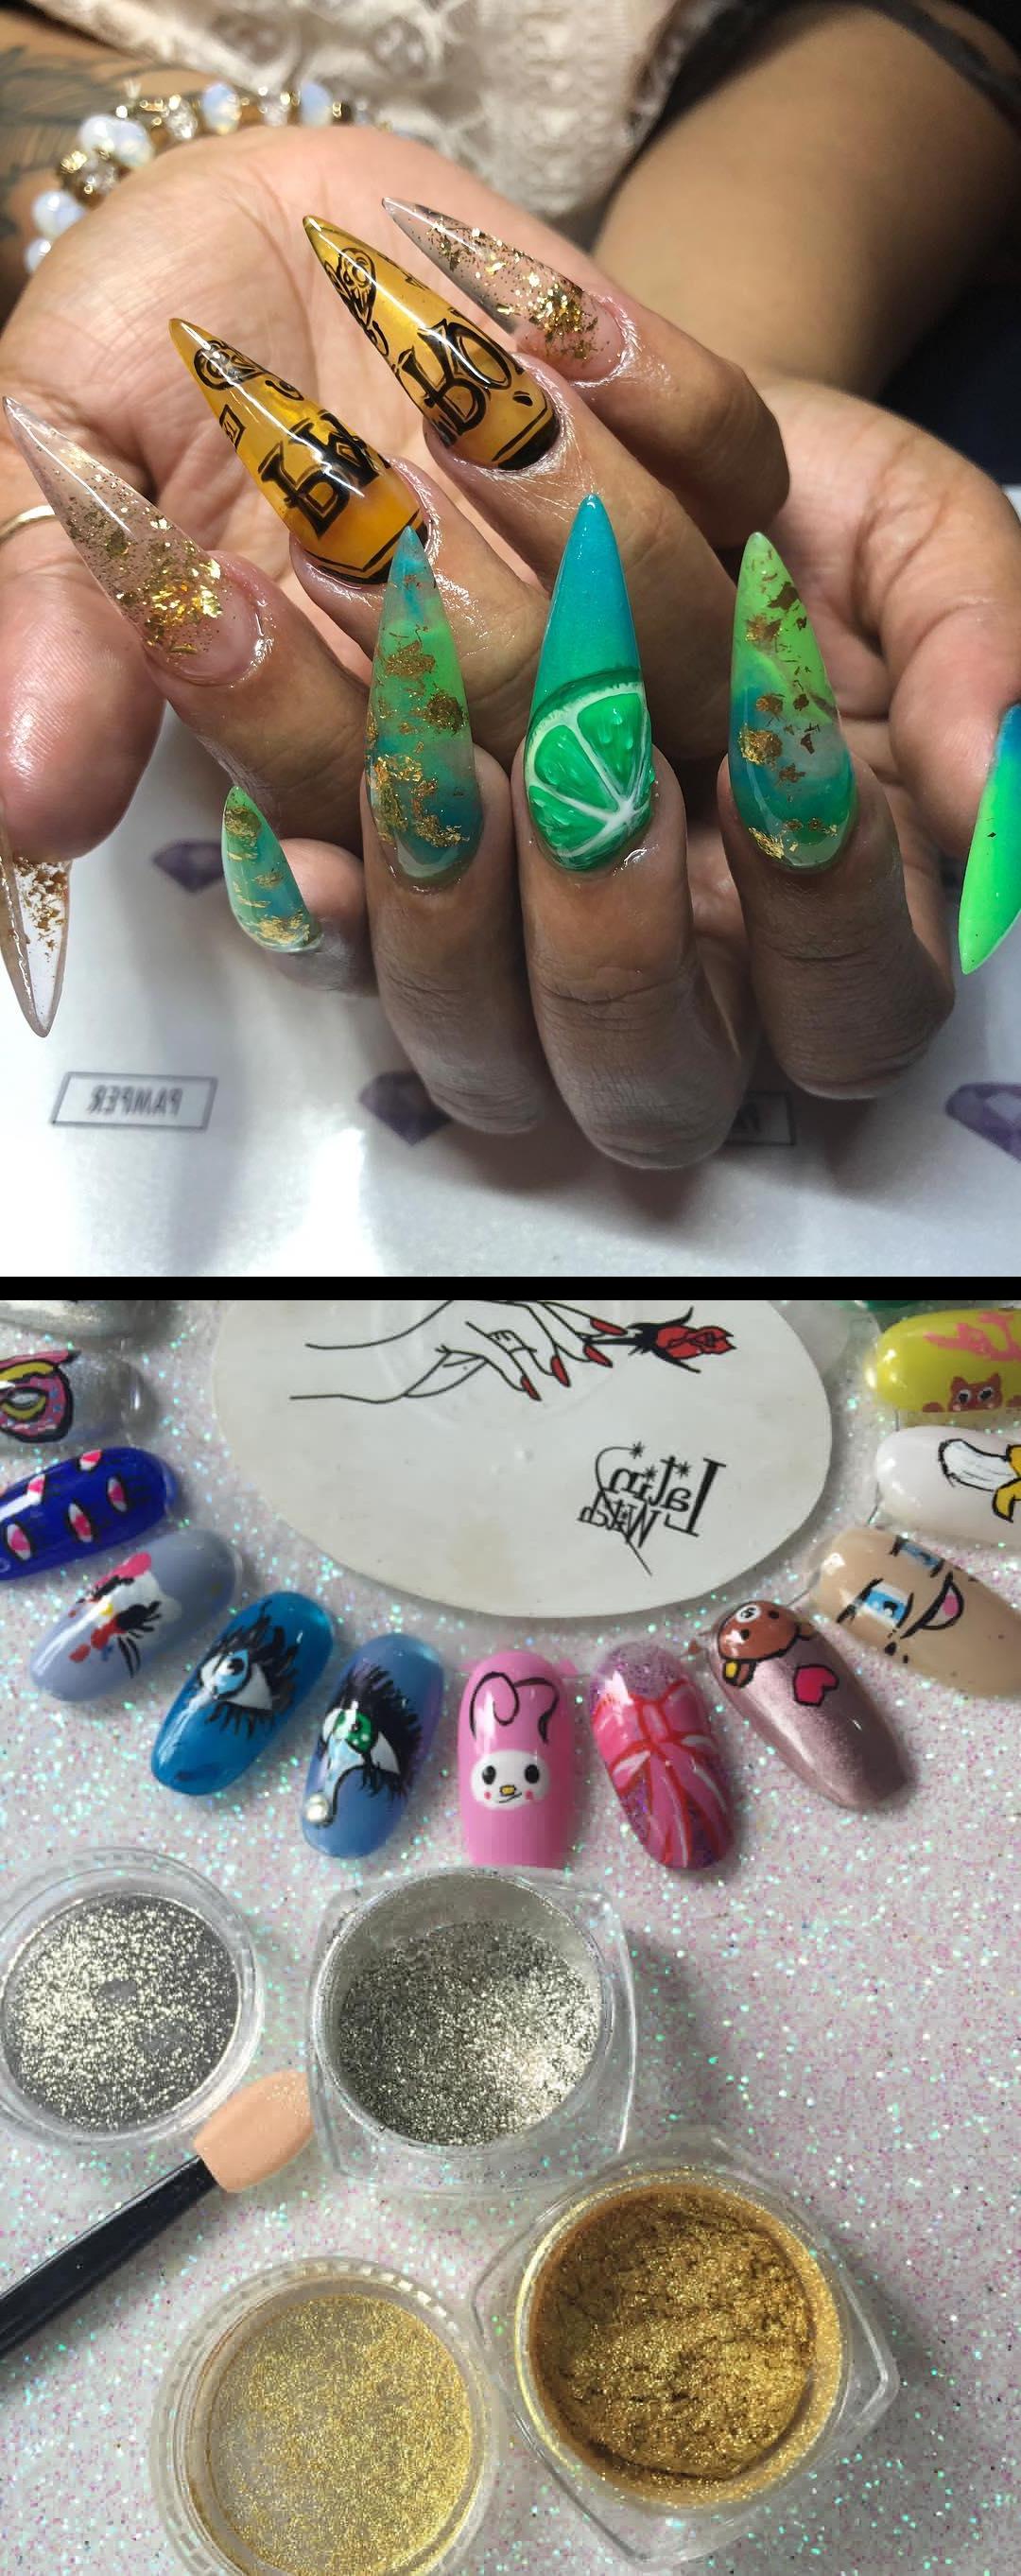 fingernails,lavish nails,your next nail service pampernailgallery- - and Limeby Pamper Artist DJ (djznailcustomz) and Session Art by Vivian (vivxue) -patron your next Full Set, Fill, or Pedi service at pampernailgallery.com Now open in Fremont, California!- , getpamper , pampernailgallery , nails , oaklandnails , sanjosenails , sfnails , bayareanails , bayareanailtech , tequila , patron , margarita , lime , fruit , clearnails , vacation , greennails , nailswag , handpainted Hey bebes chrome nails disponibles ya!!!! citas disponibles whatsapp 5513365846 